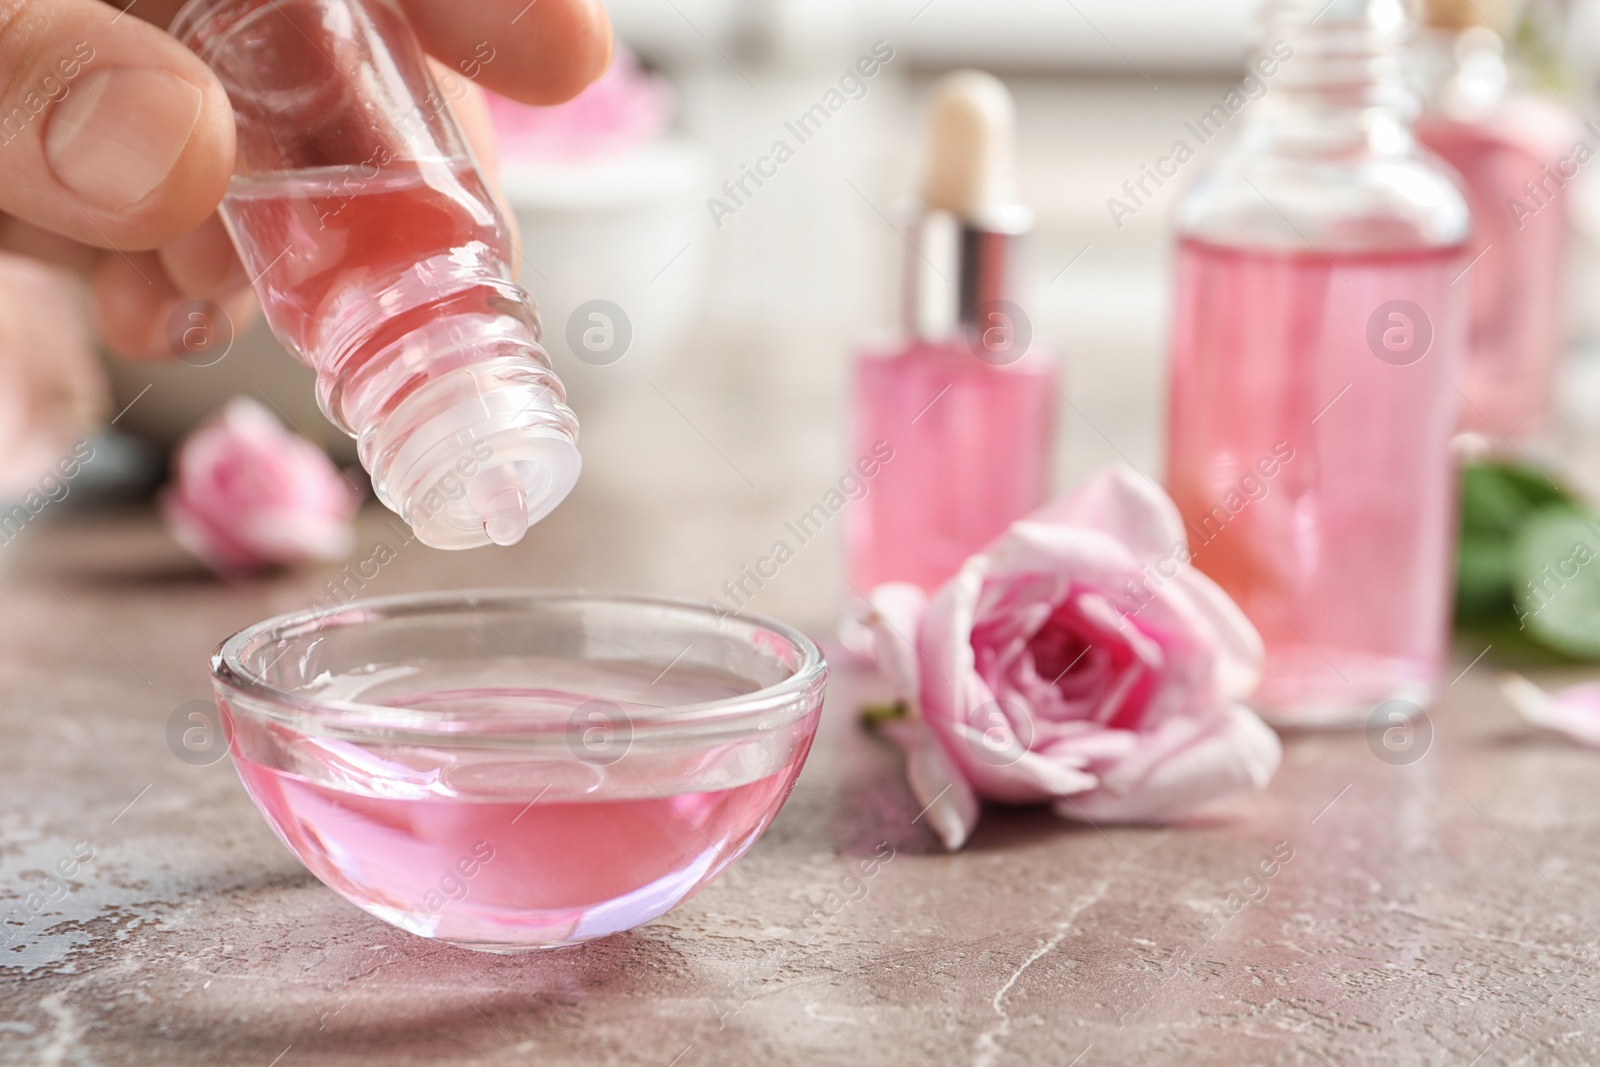 Photo of Woman dripping rose essential oil into bowl on table, closeup. Space for text